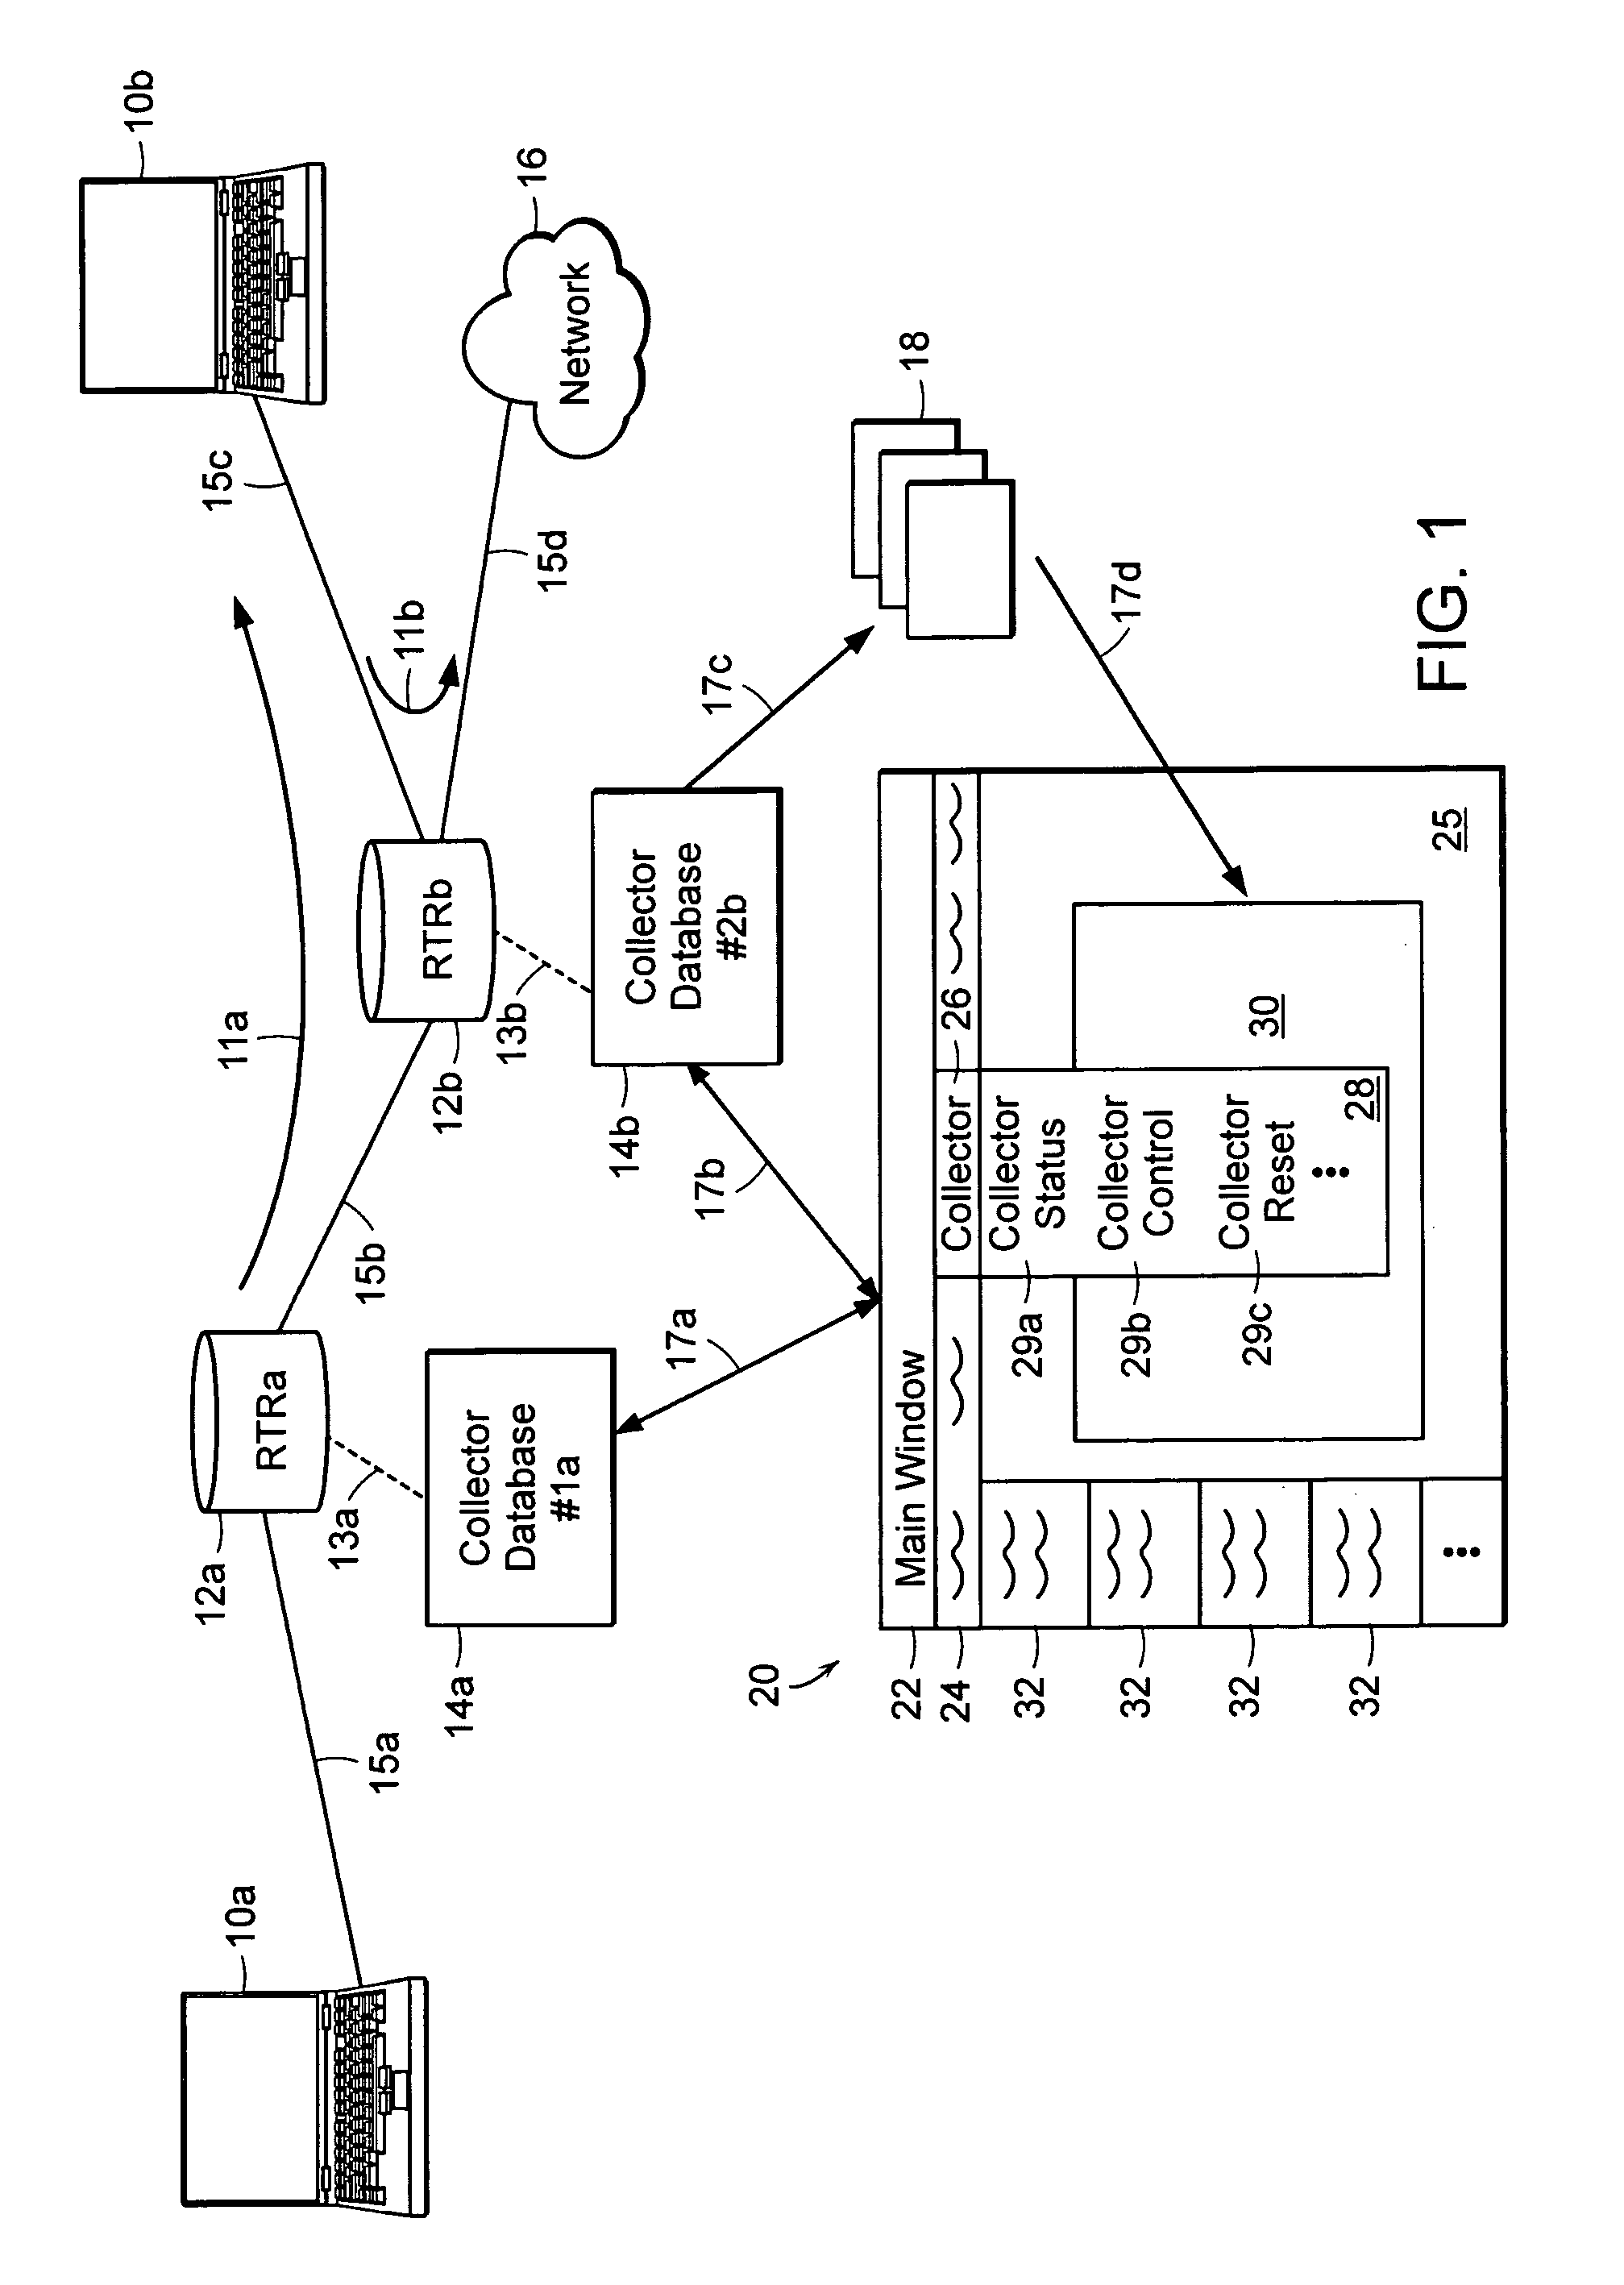 Method and apparatus for software technical support and training